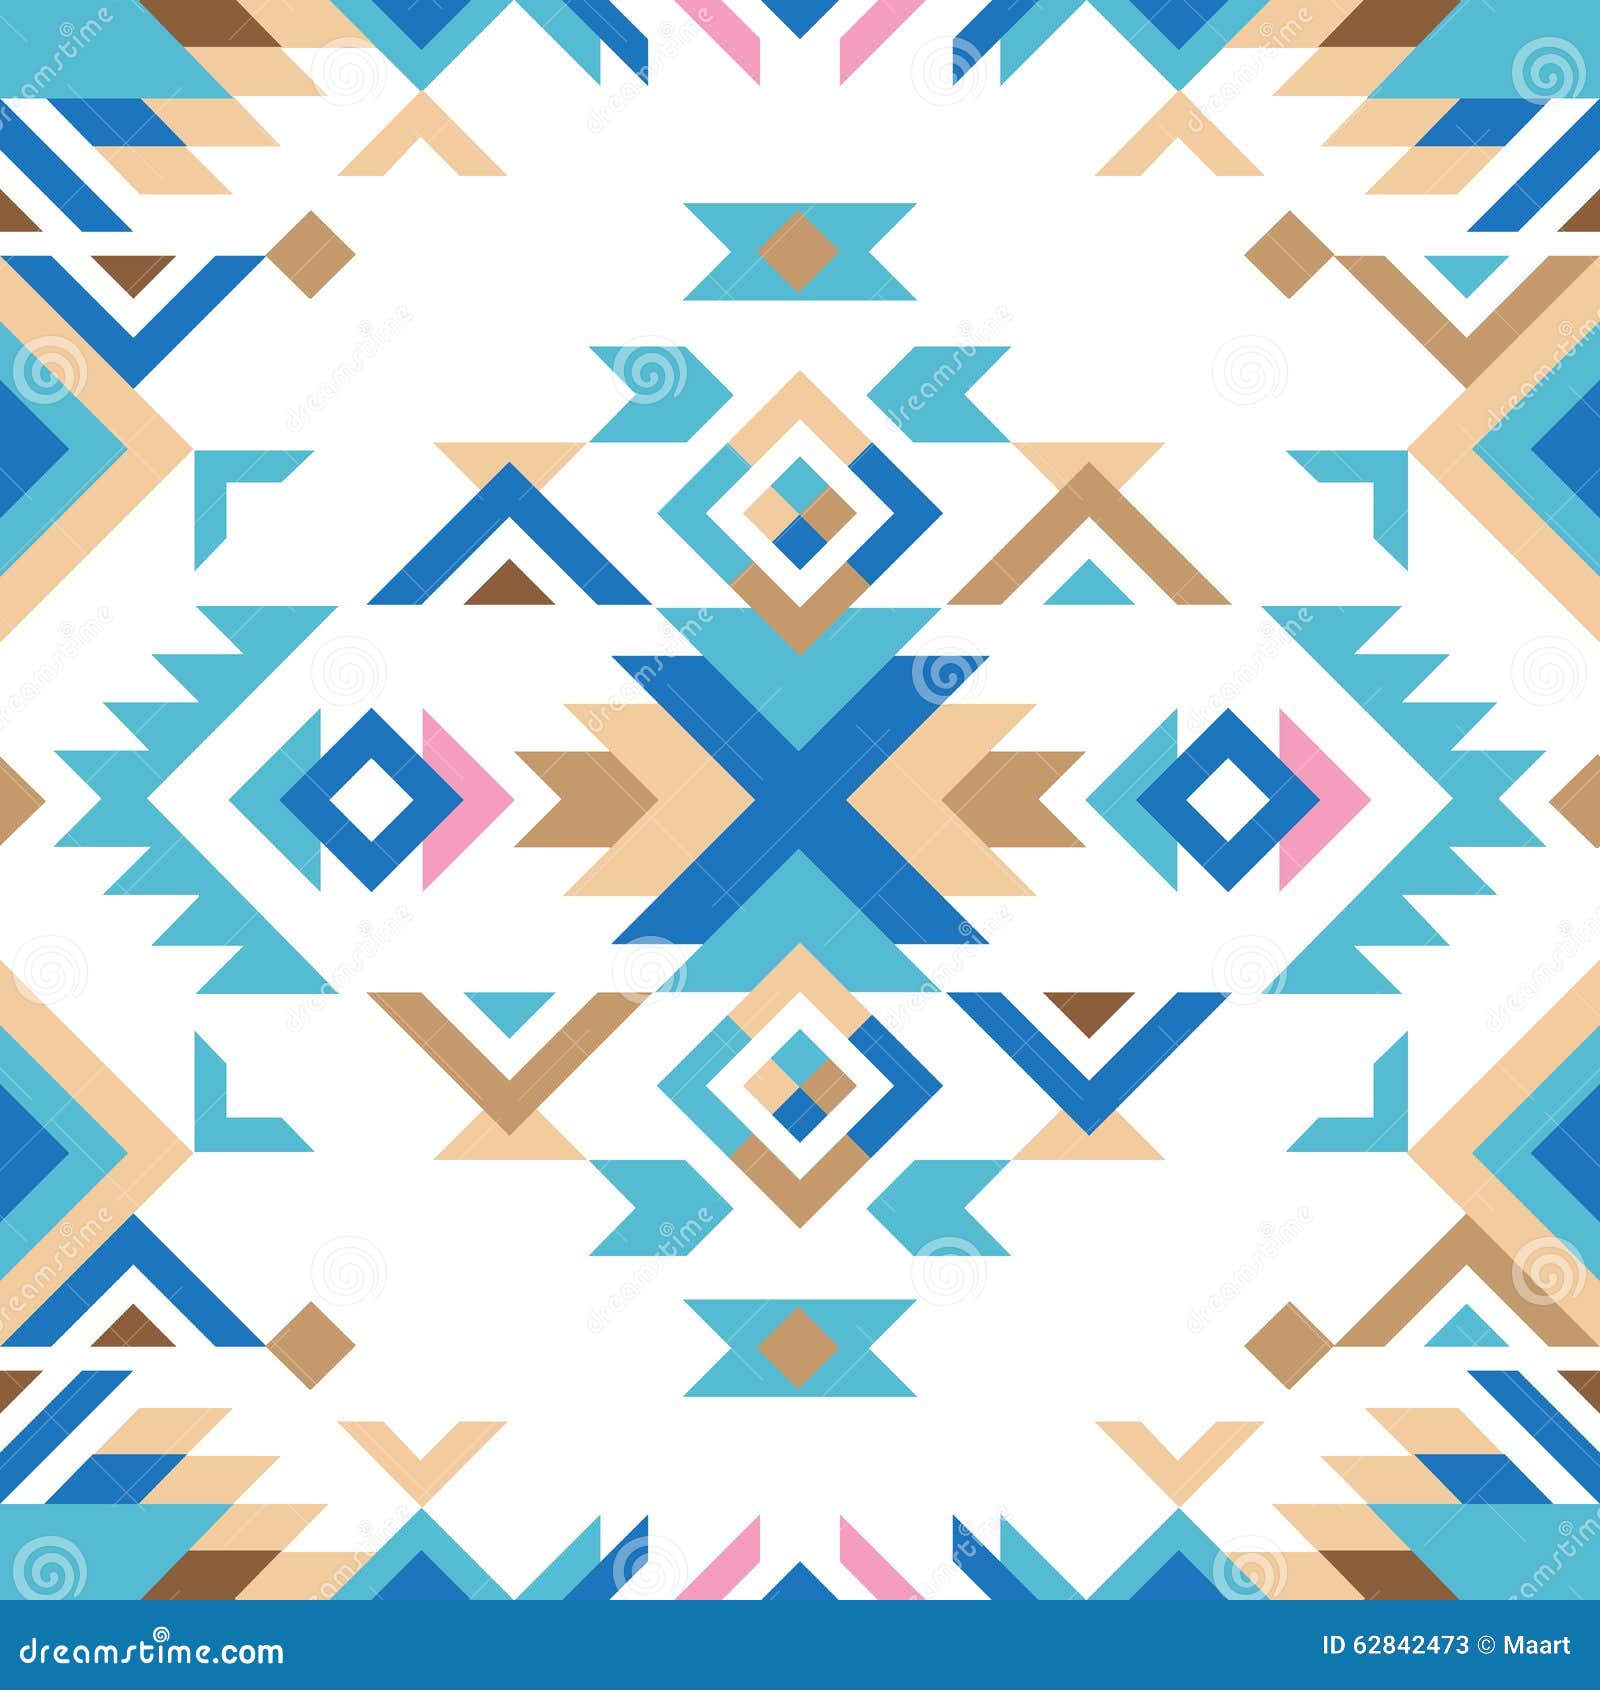 Colorful Tribal Seamless Pattern Stock Vector - Illustration of ...